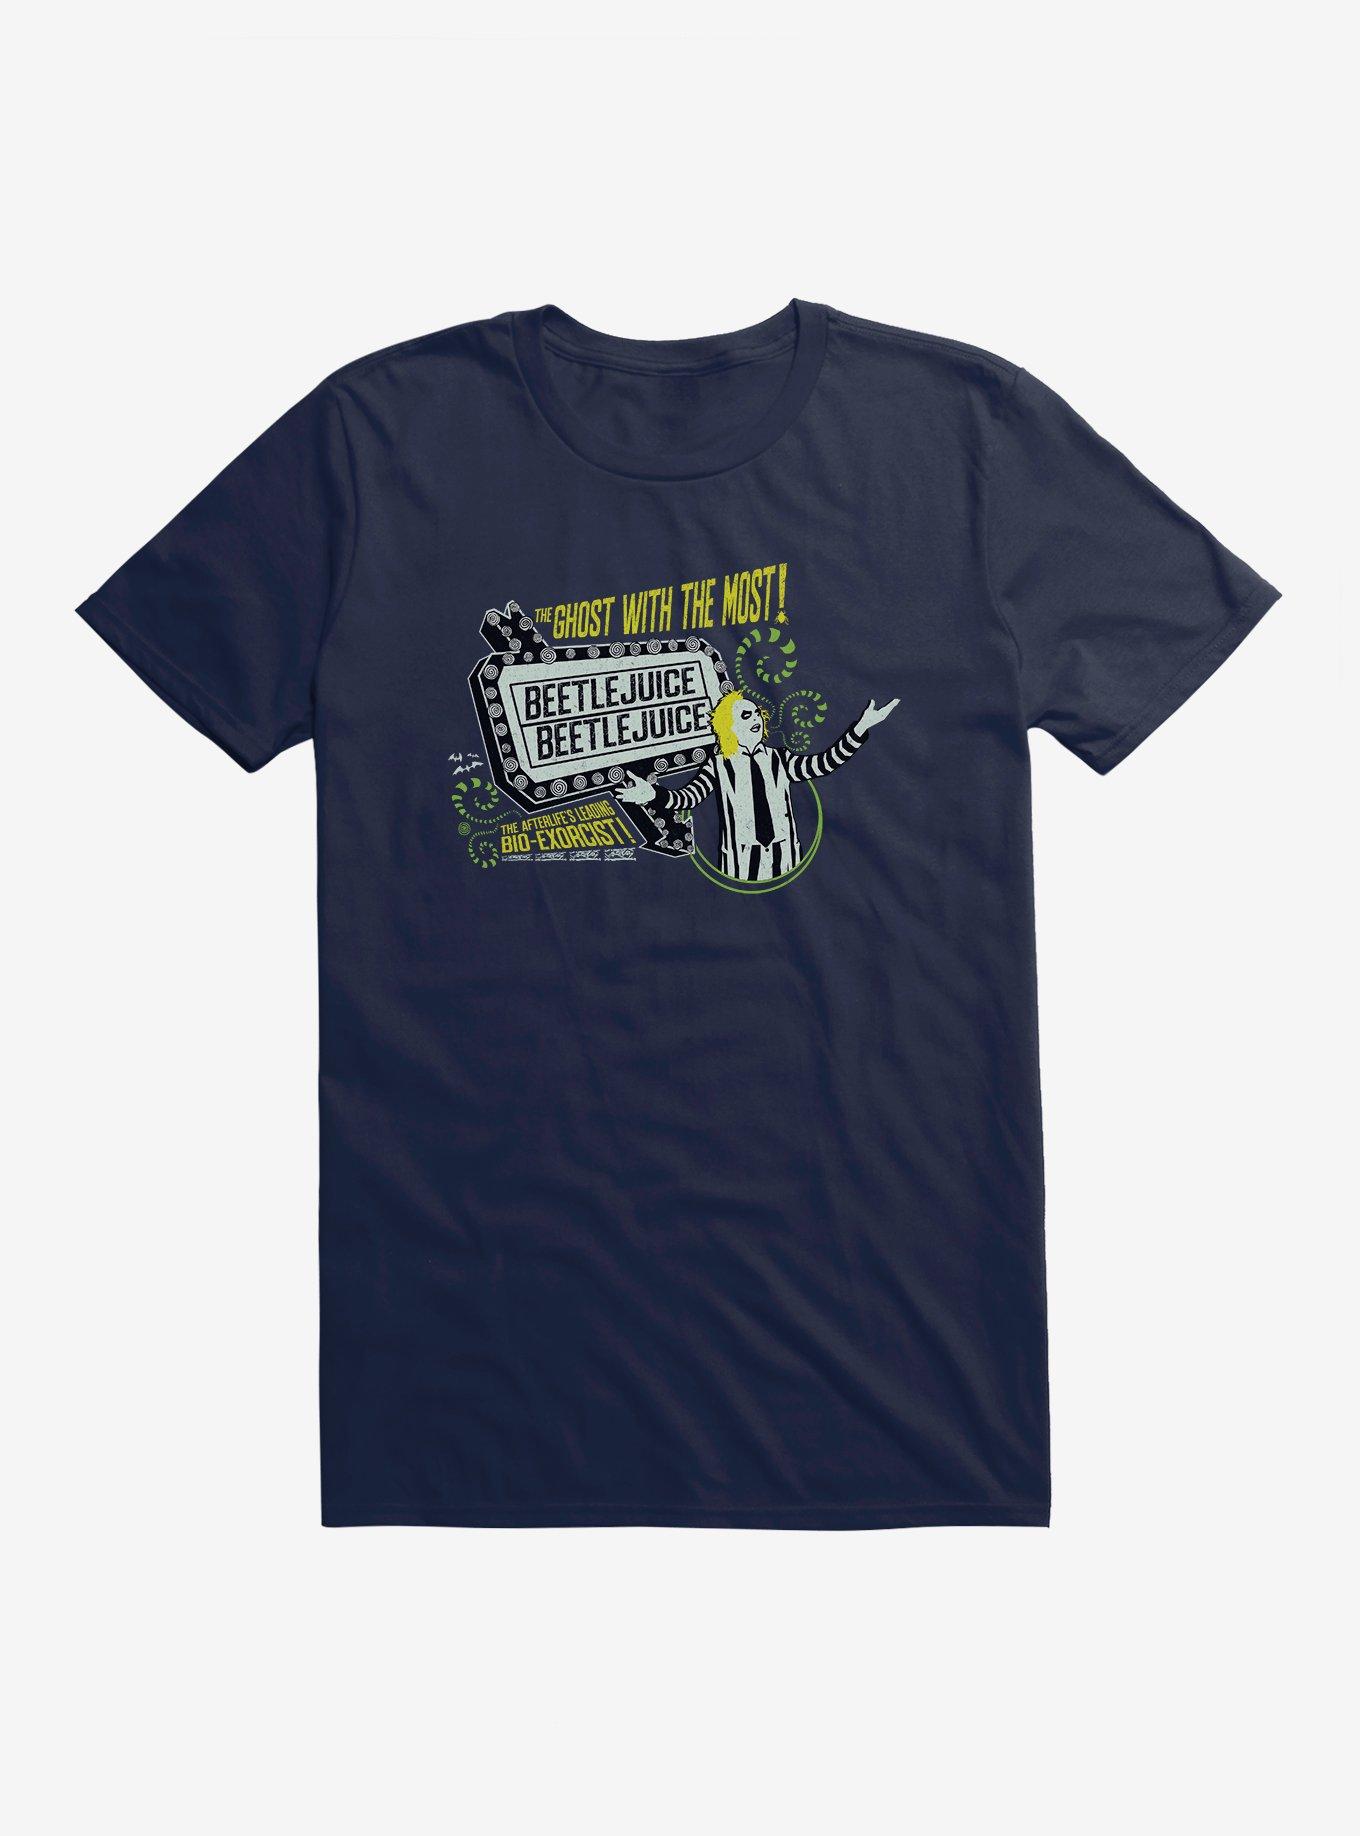 Beetlejuice Ghost With Most T-Shirt - BLUE | BoxLunch